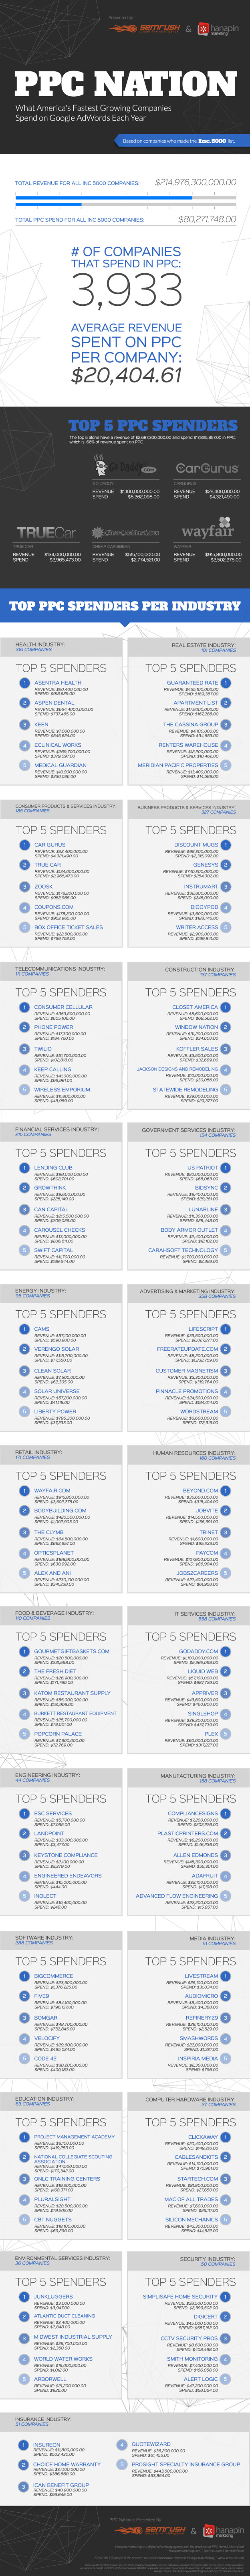 What America's fastest growing companies spend on Google AdWords each year infographic